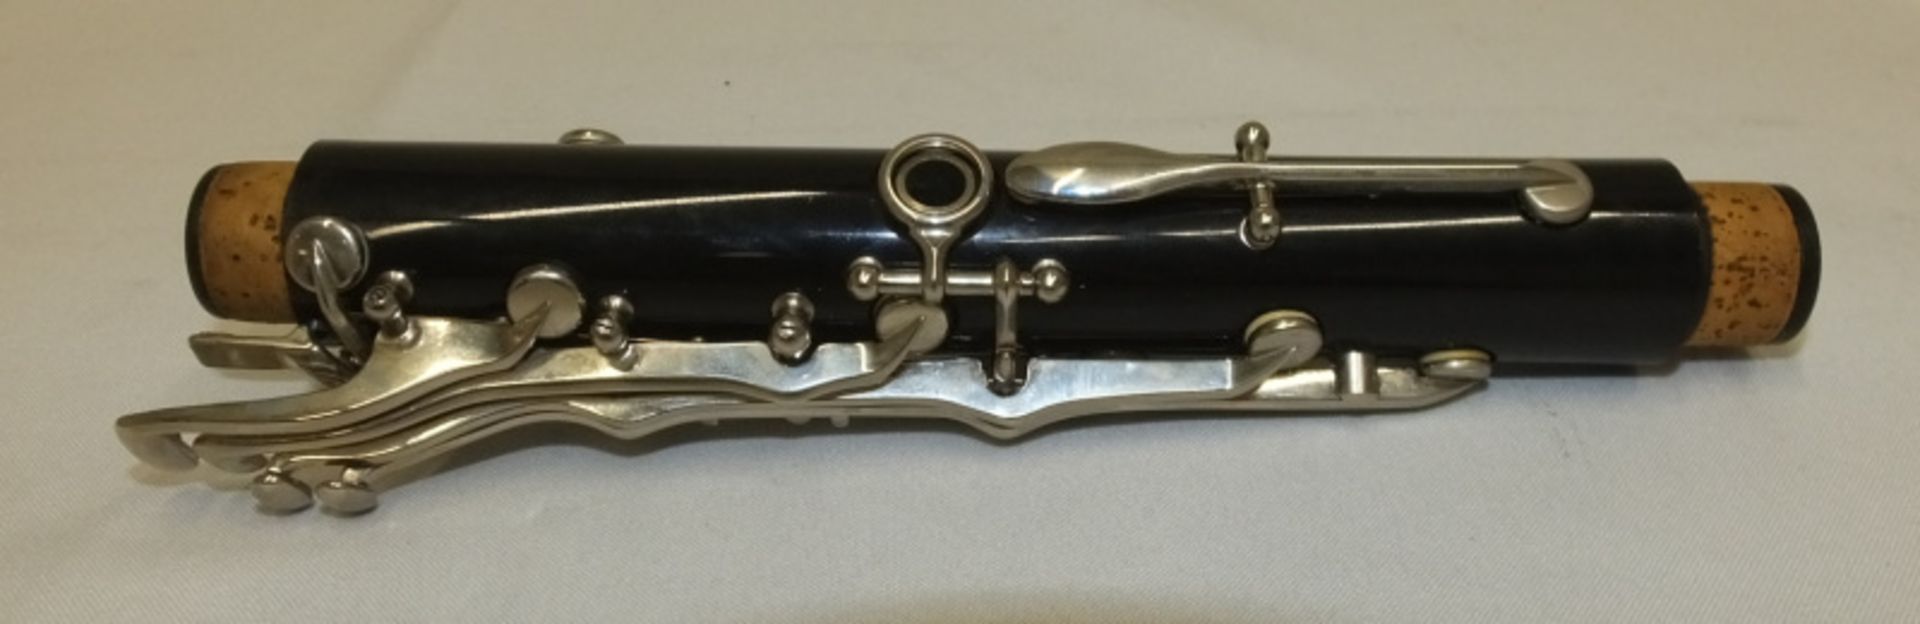 Bundy Resonite Clarinet in case - serial number S243328 - Please check photos carefully - Image 7 of 19